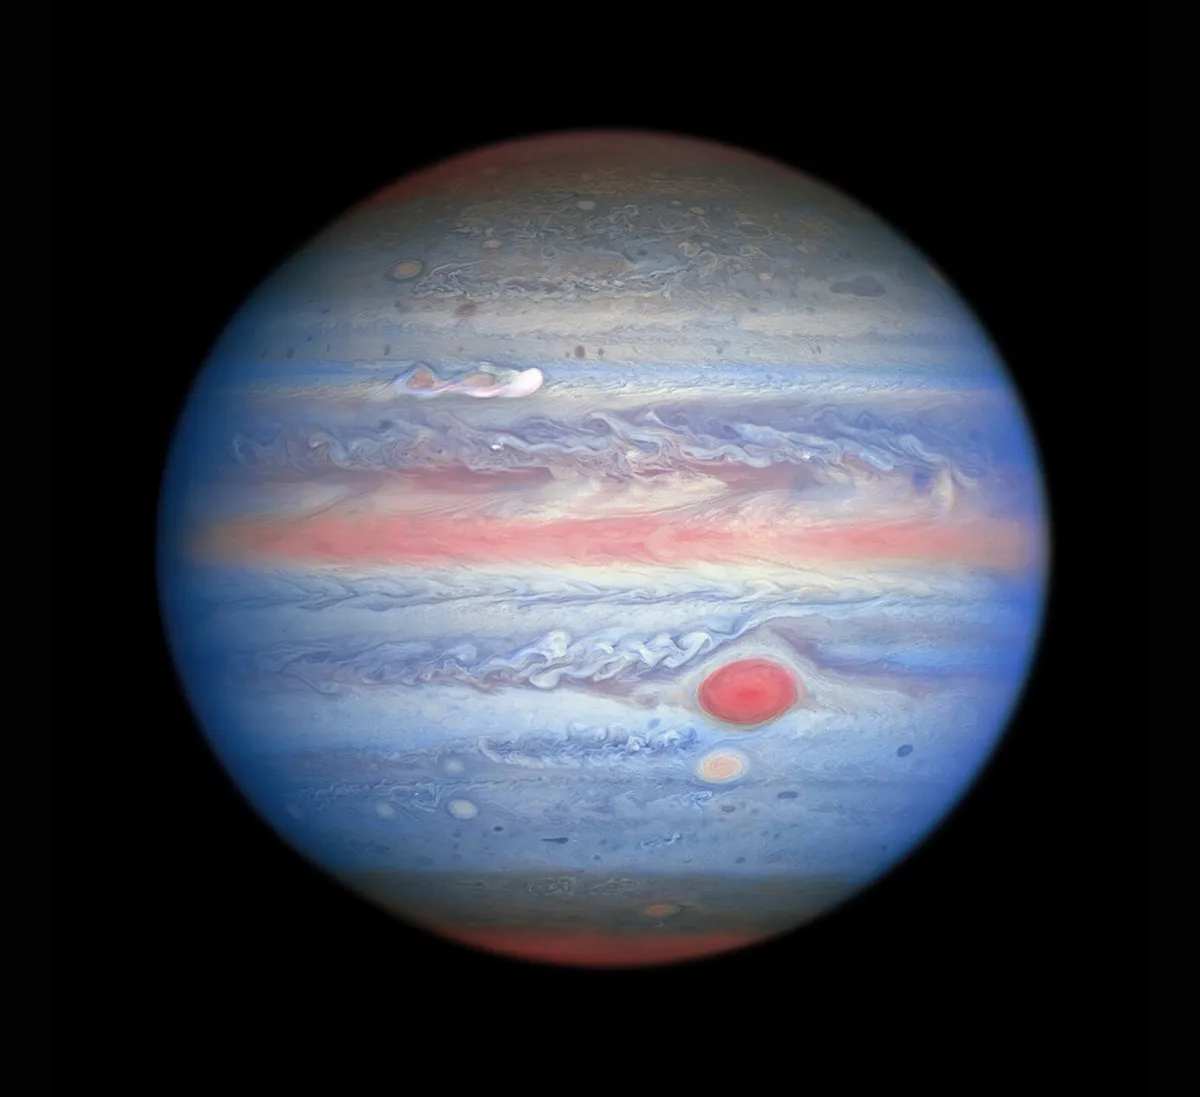 An ultraviolet/visible/near-infrared light view of Jupiter captured by the Hubble Space Telescope. Credit: NASA, ESA, A. Simon (Goddard Space Flight Center), and M. H. Wong (University of California, Berkeley) and the OPAL team.